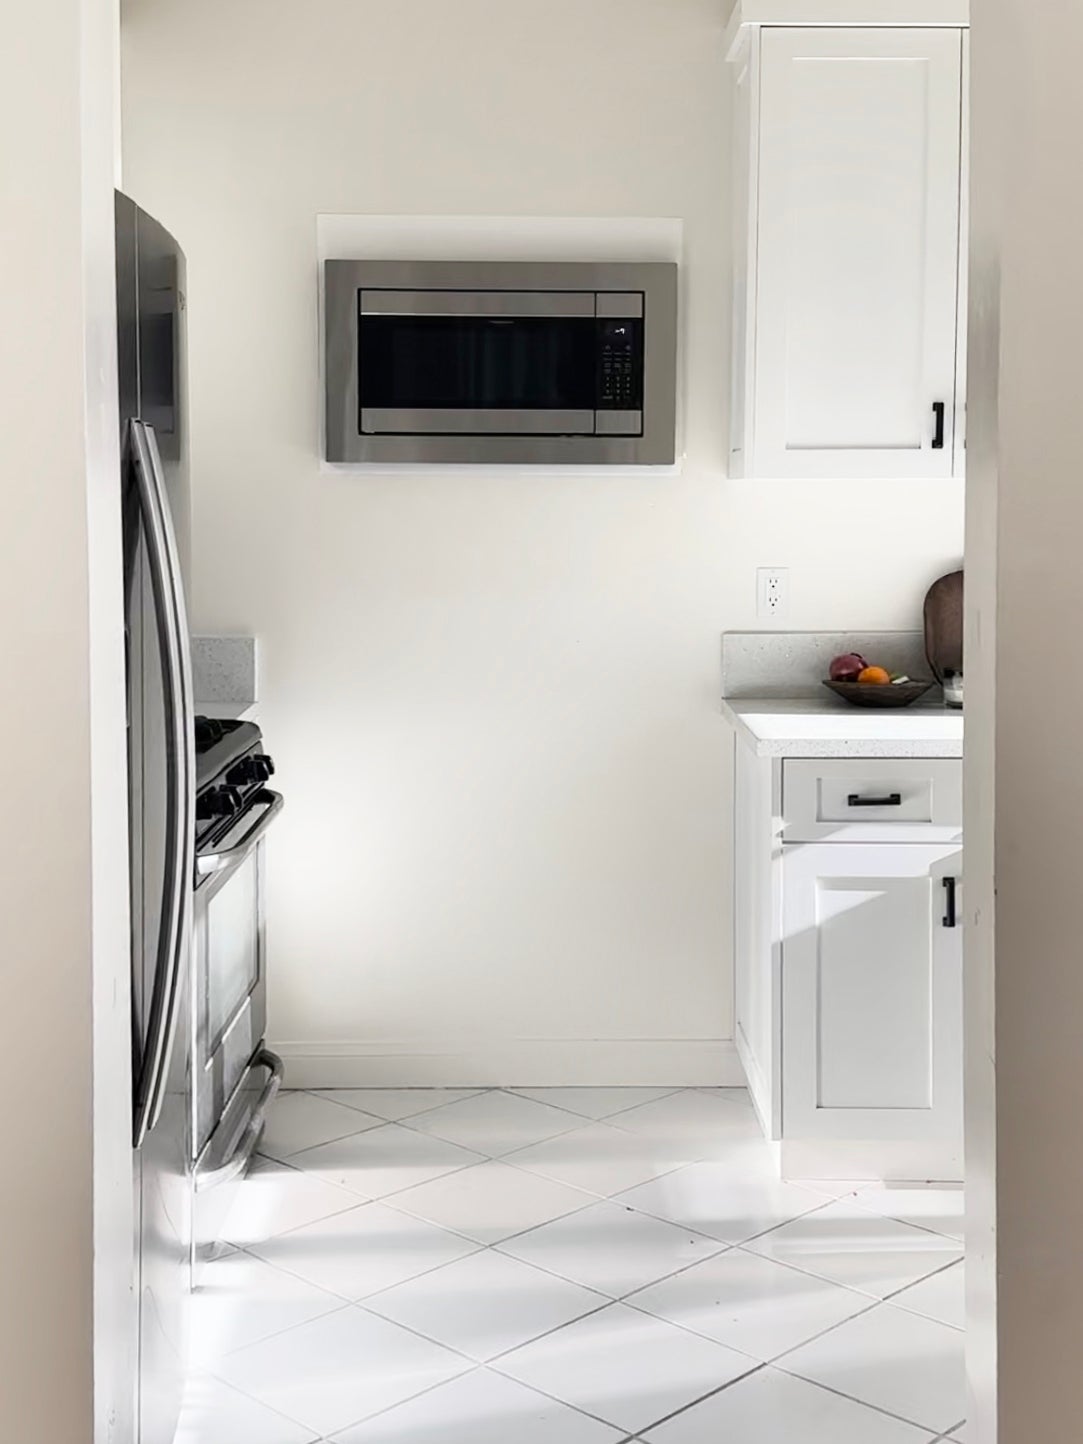 white kitchen with microwave in wall